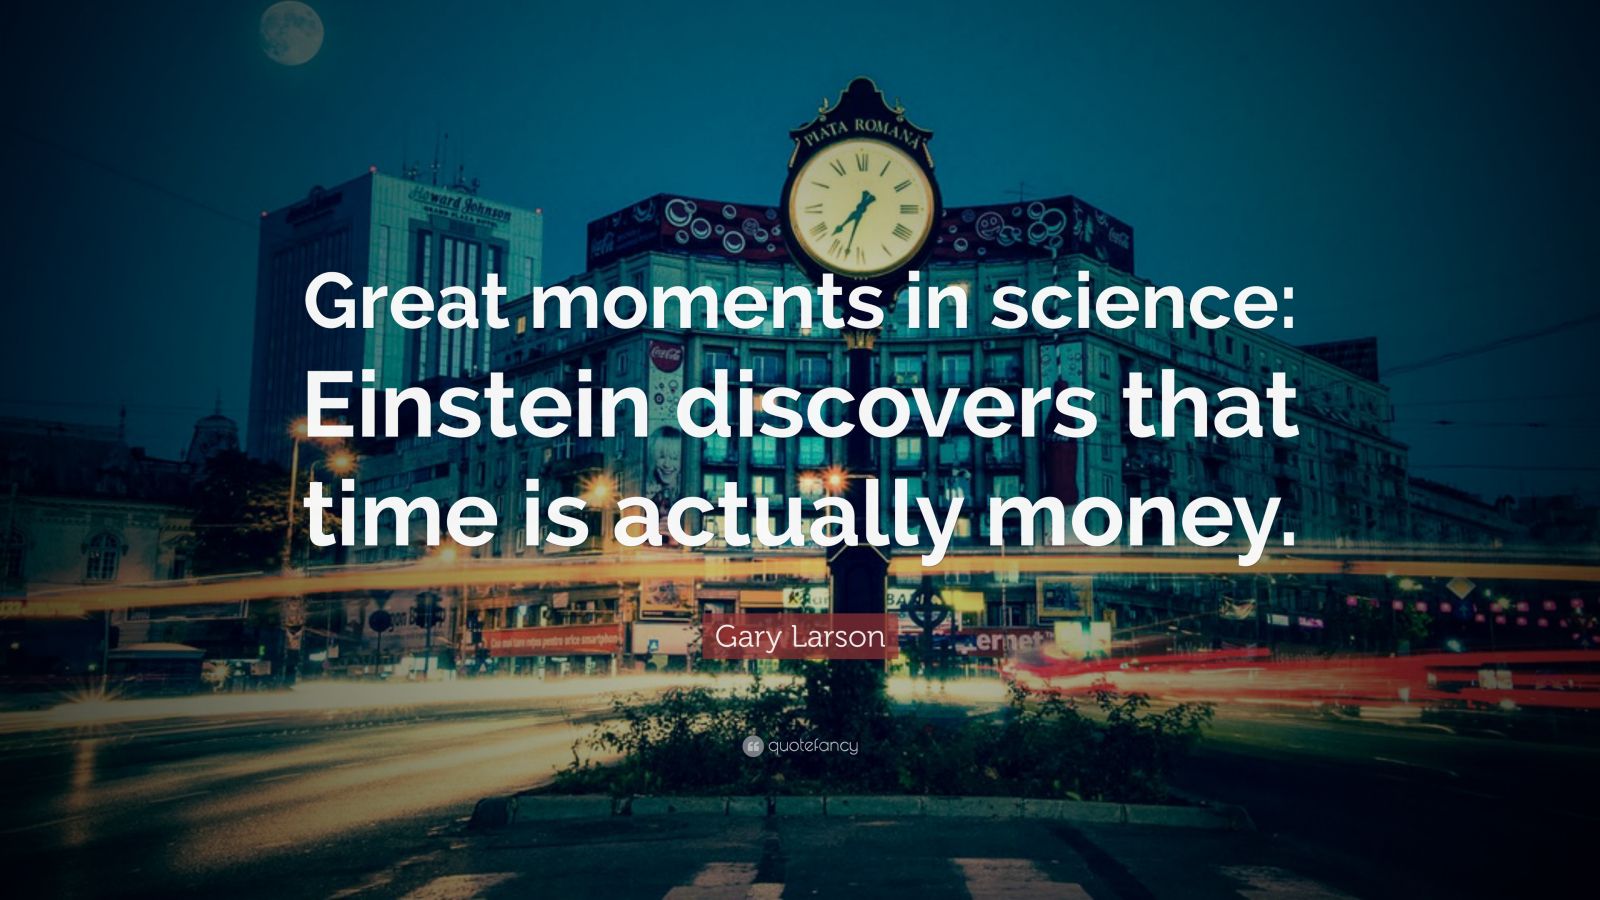 Gary Larson Quote: “Great moments in science: Einstein discovers that